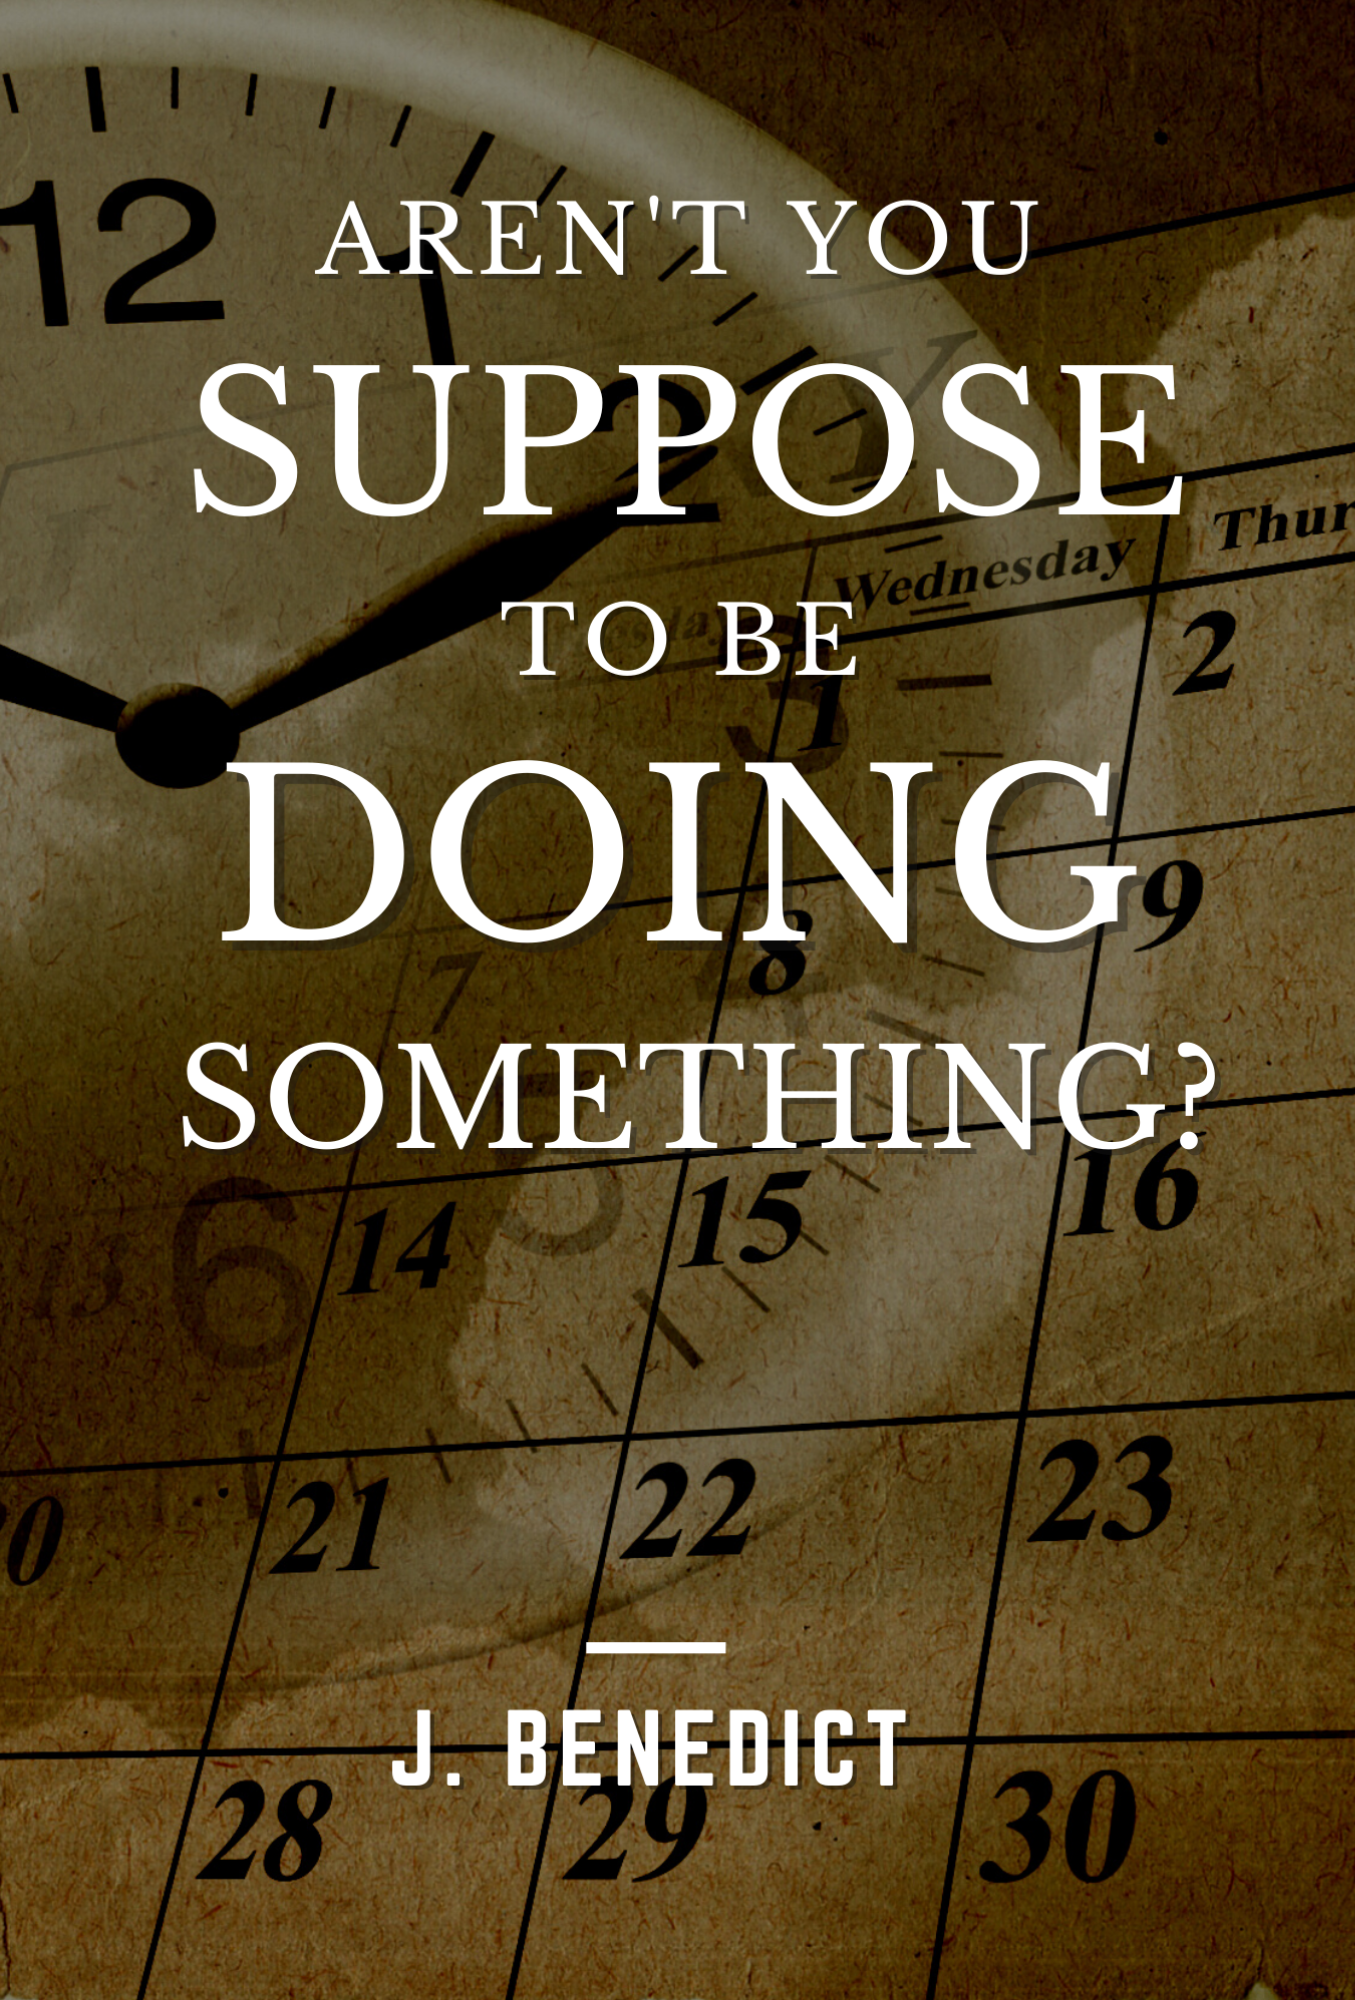 Aren't You Suppose To Be Doing Something? (Ebook)